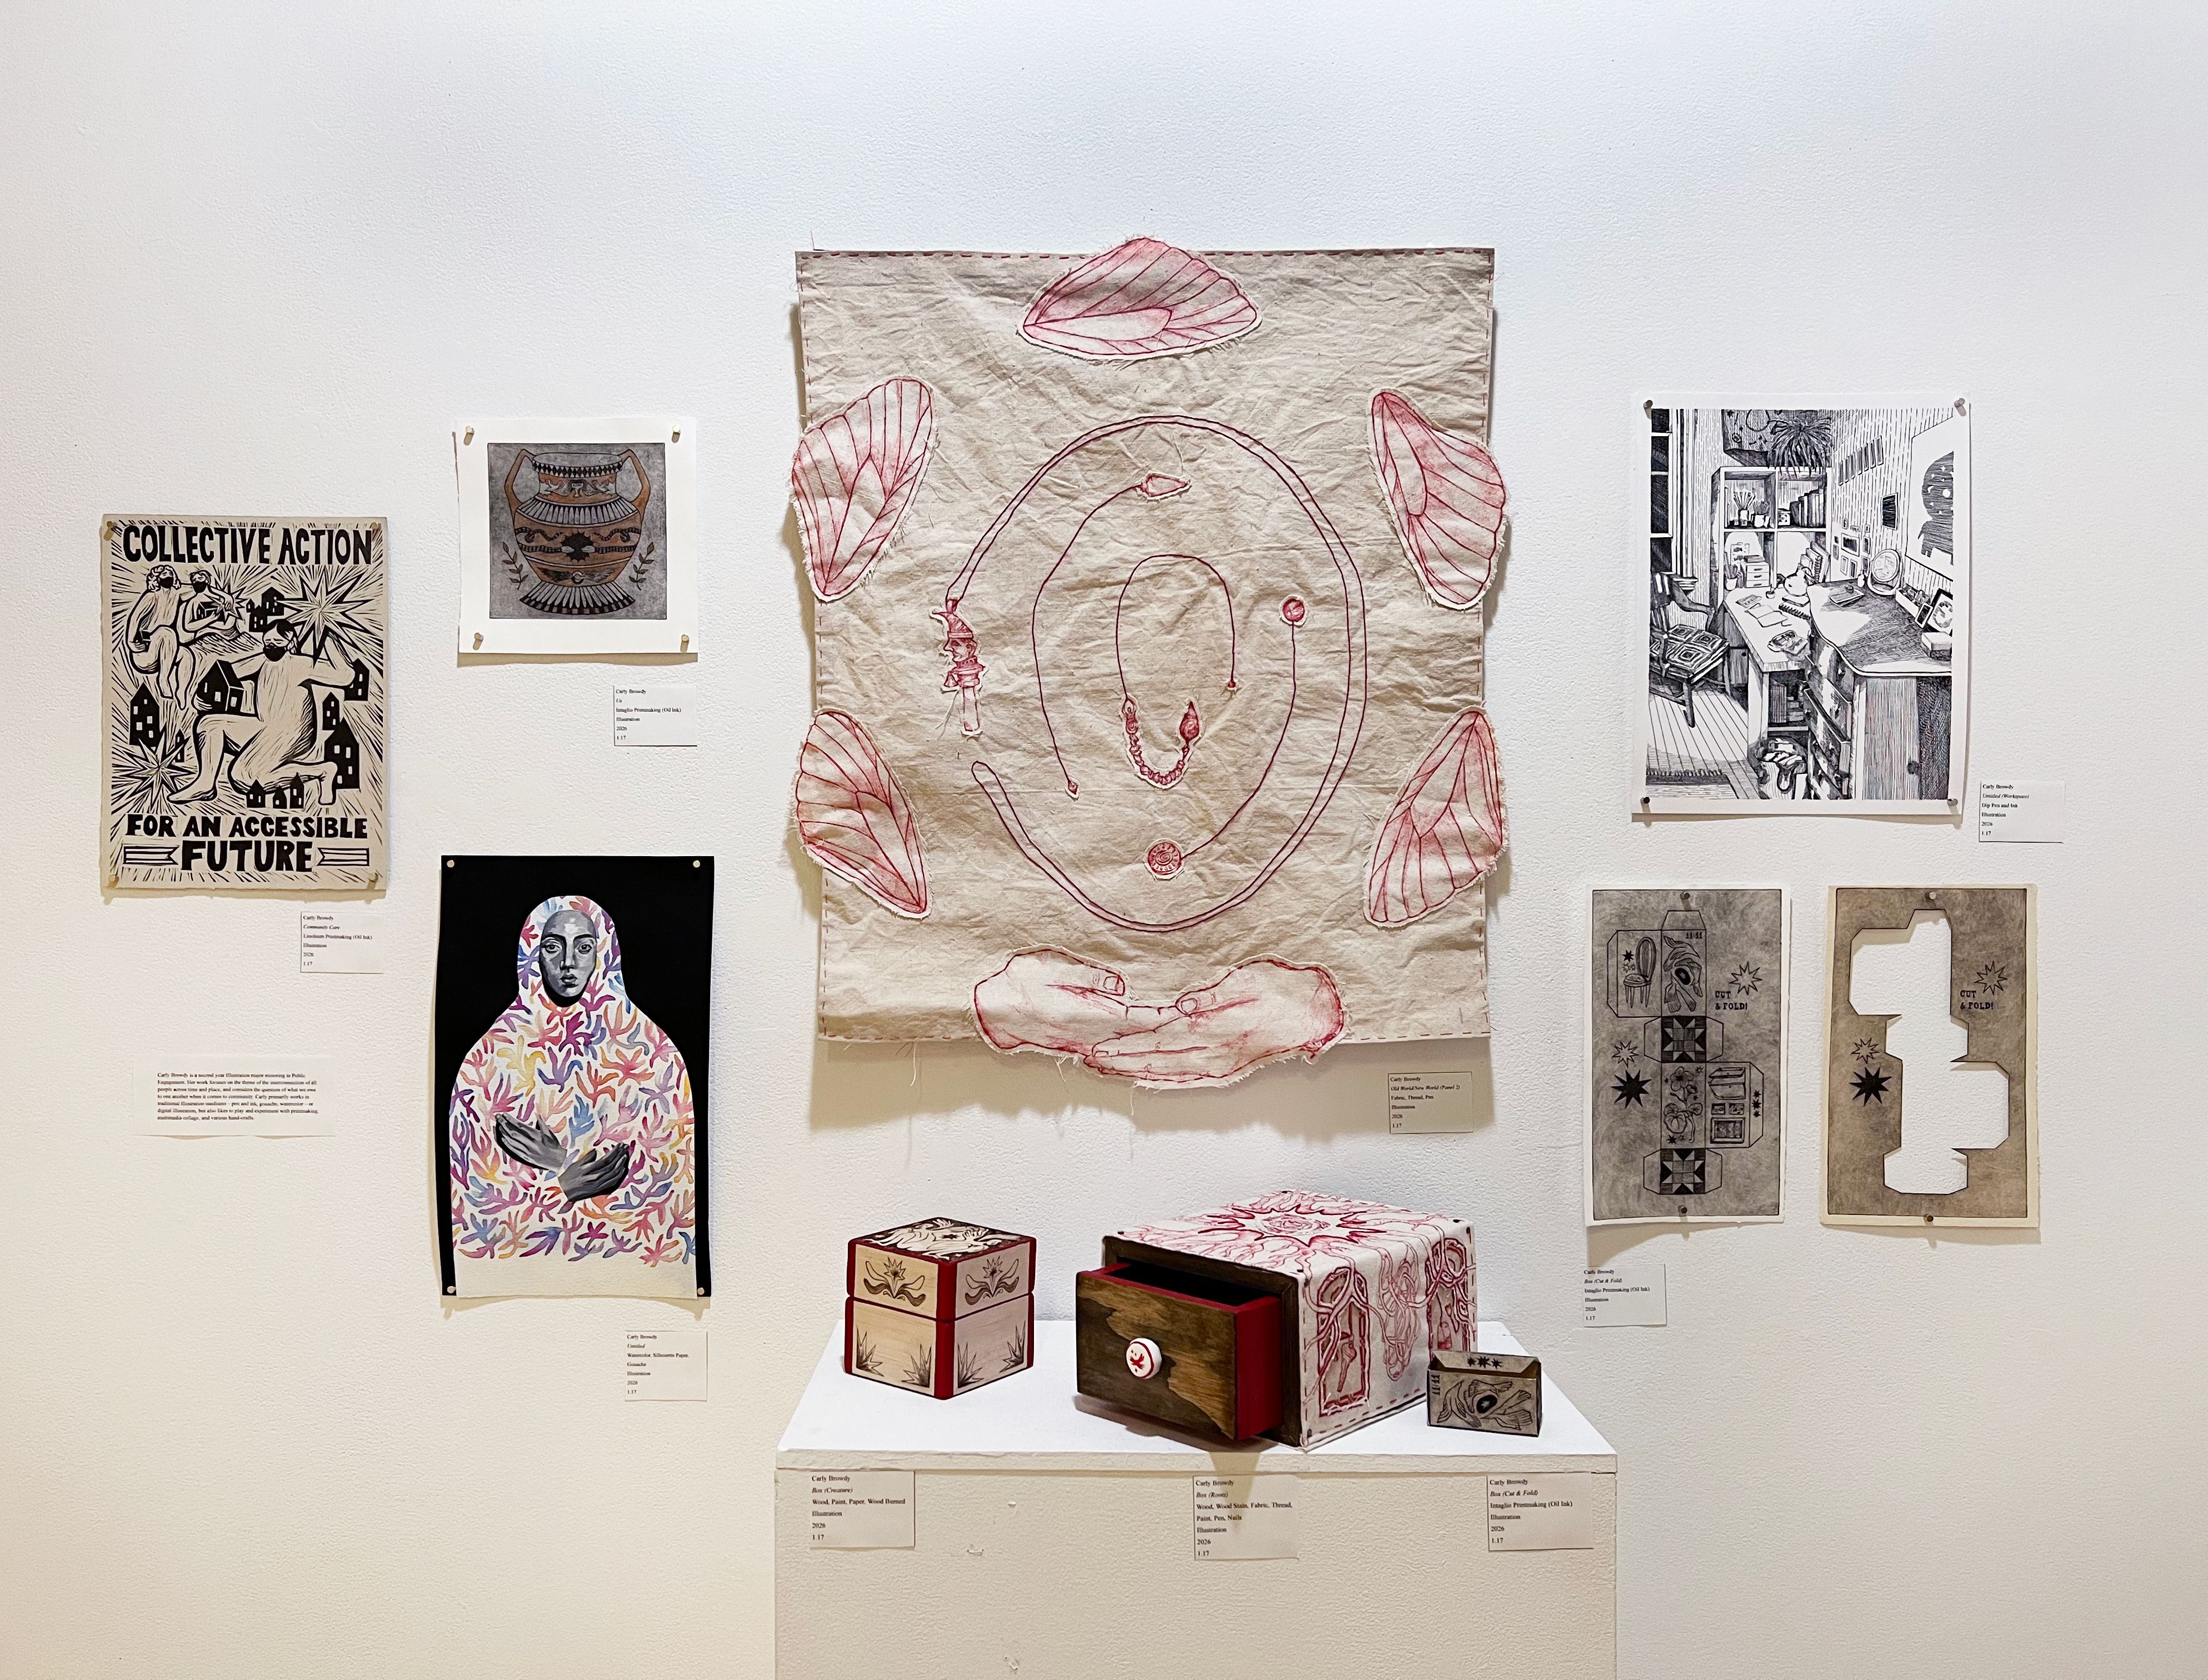 An installation of artwork including illustrations, an embroidered tapestry, and a wooden box.